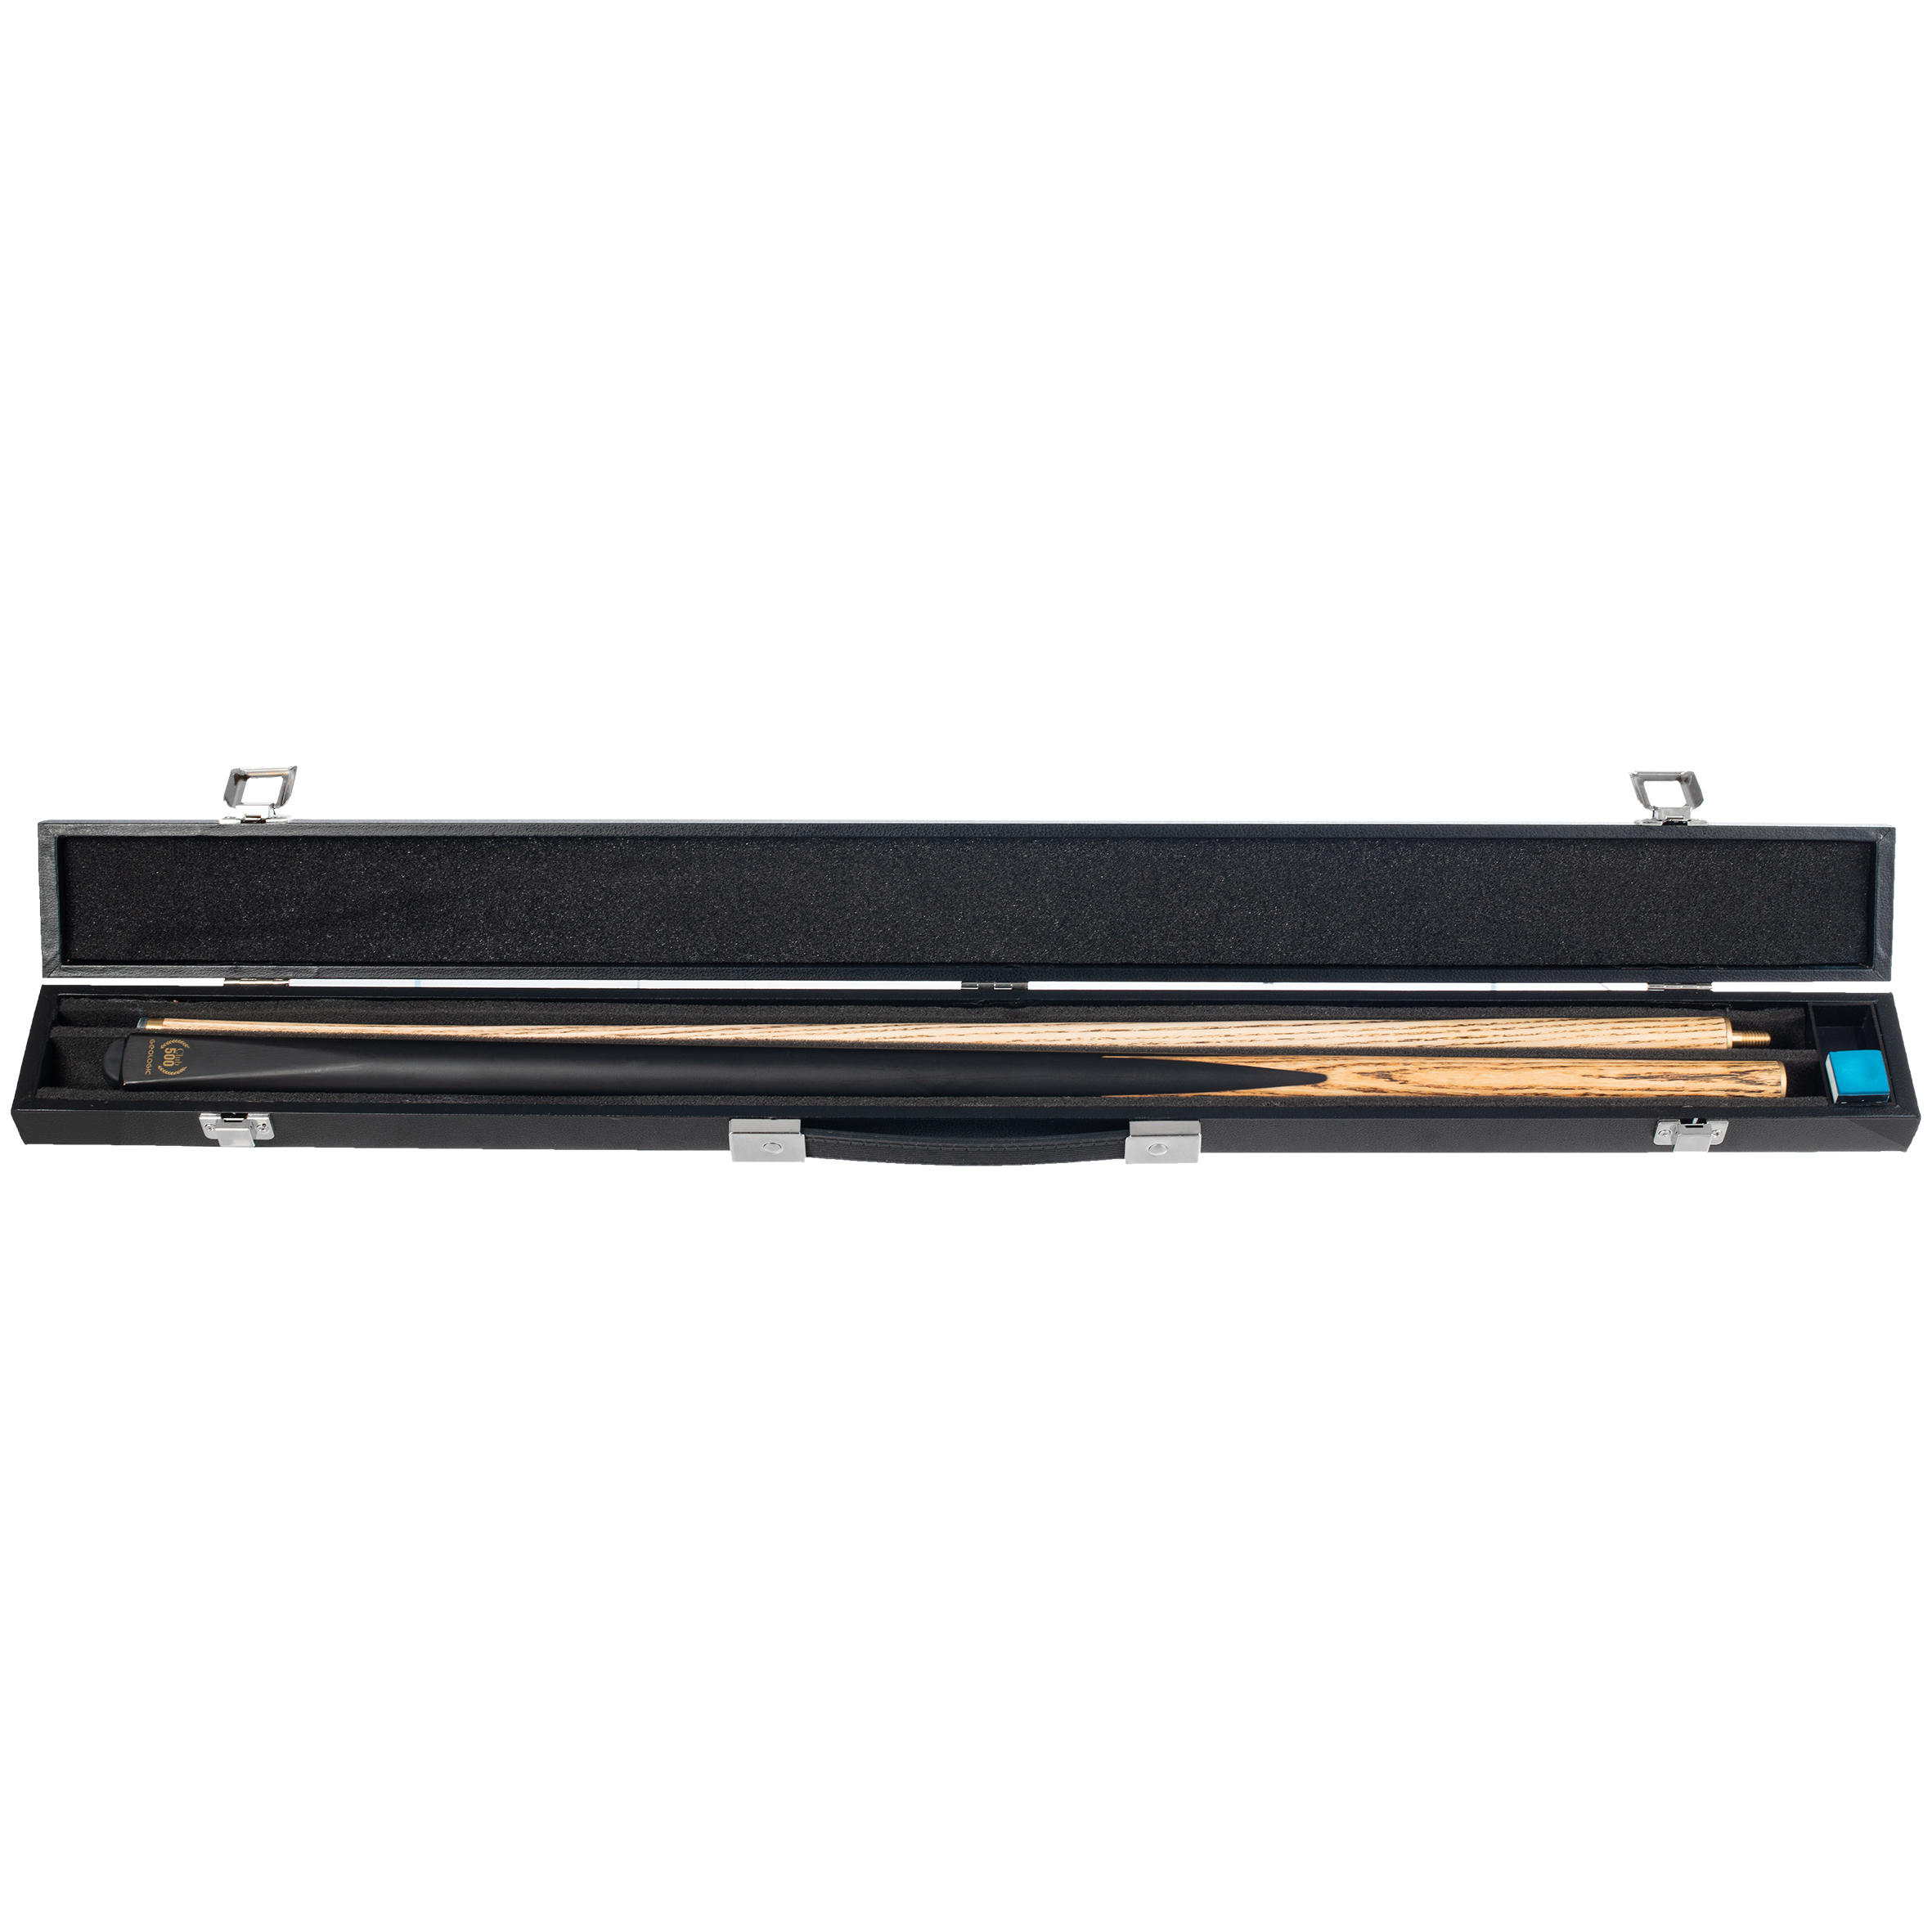 Hard Case for Your 1/2 Jointed Billiards Cue 4/9